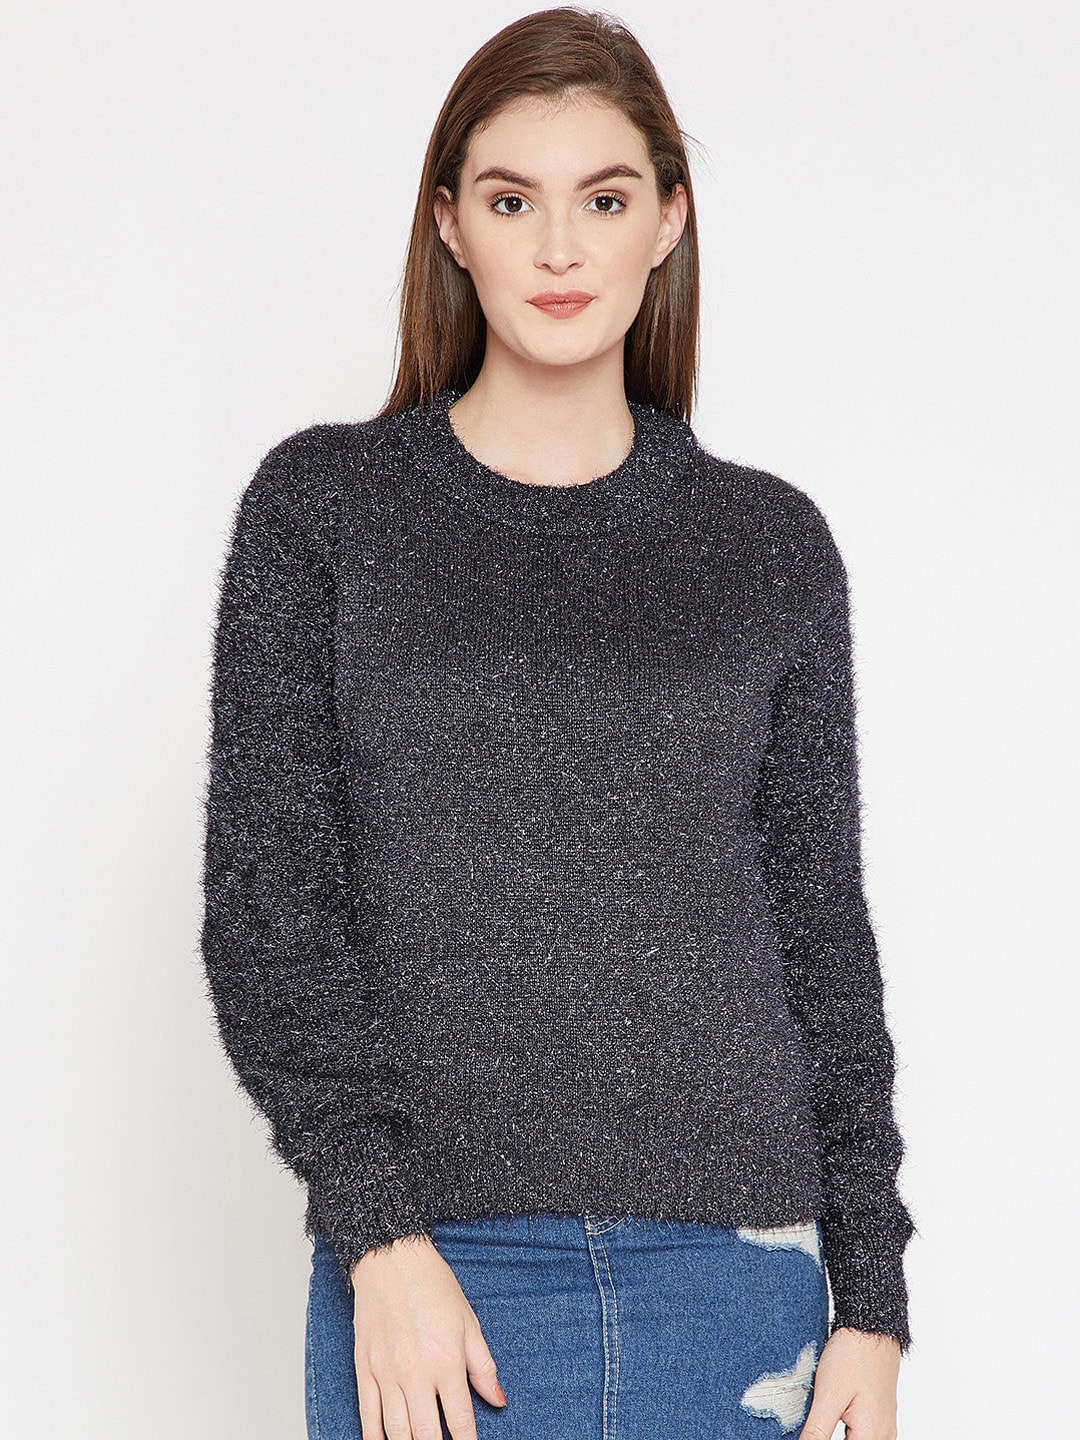 Marie Claire Women Charcoal Self Design Pullover Price in India